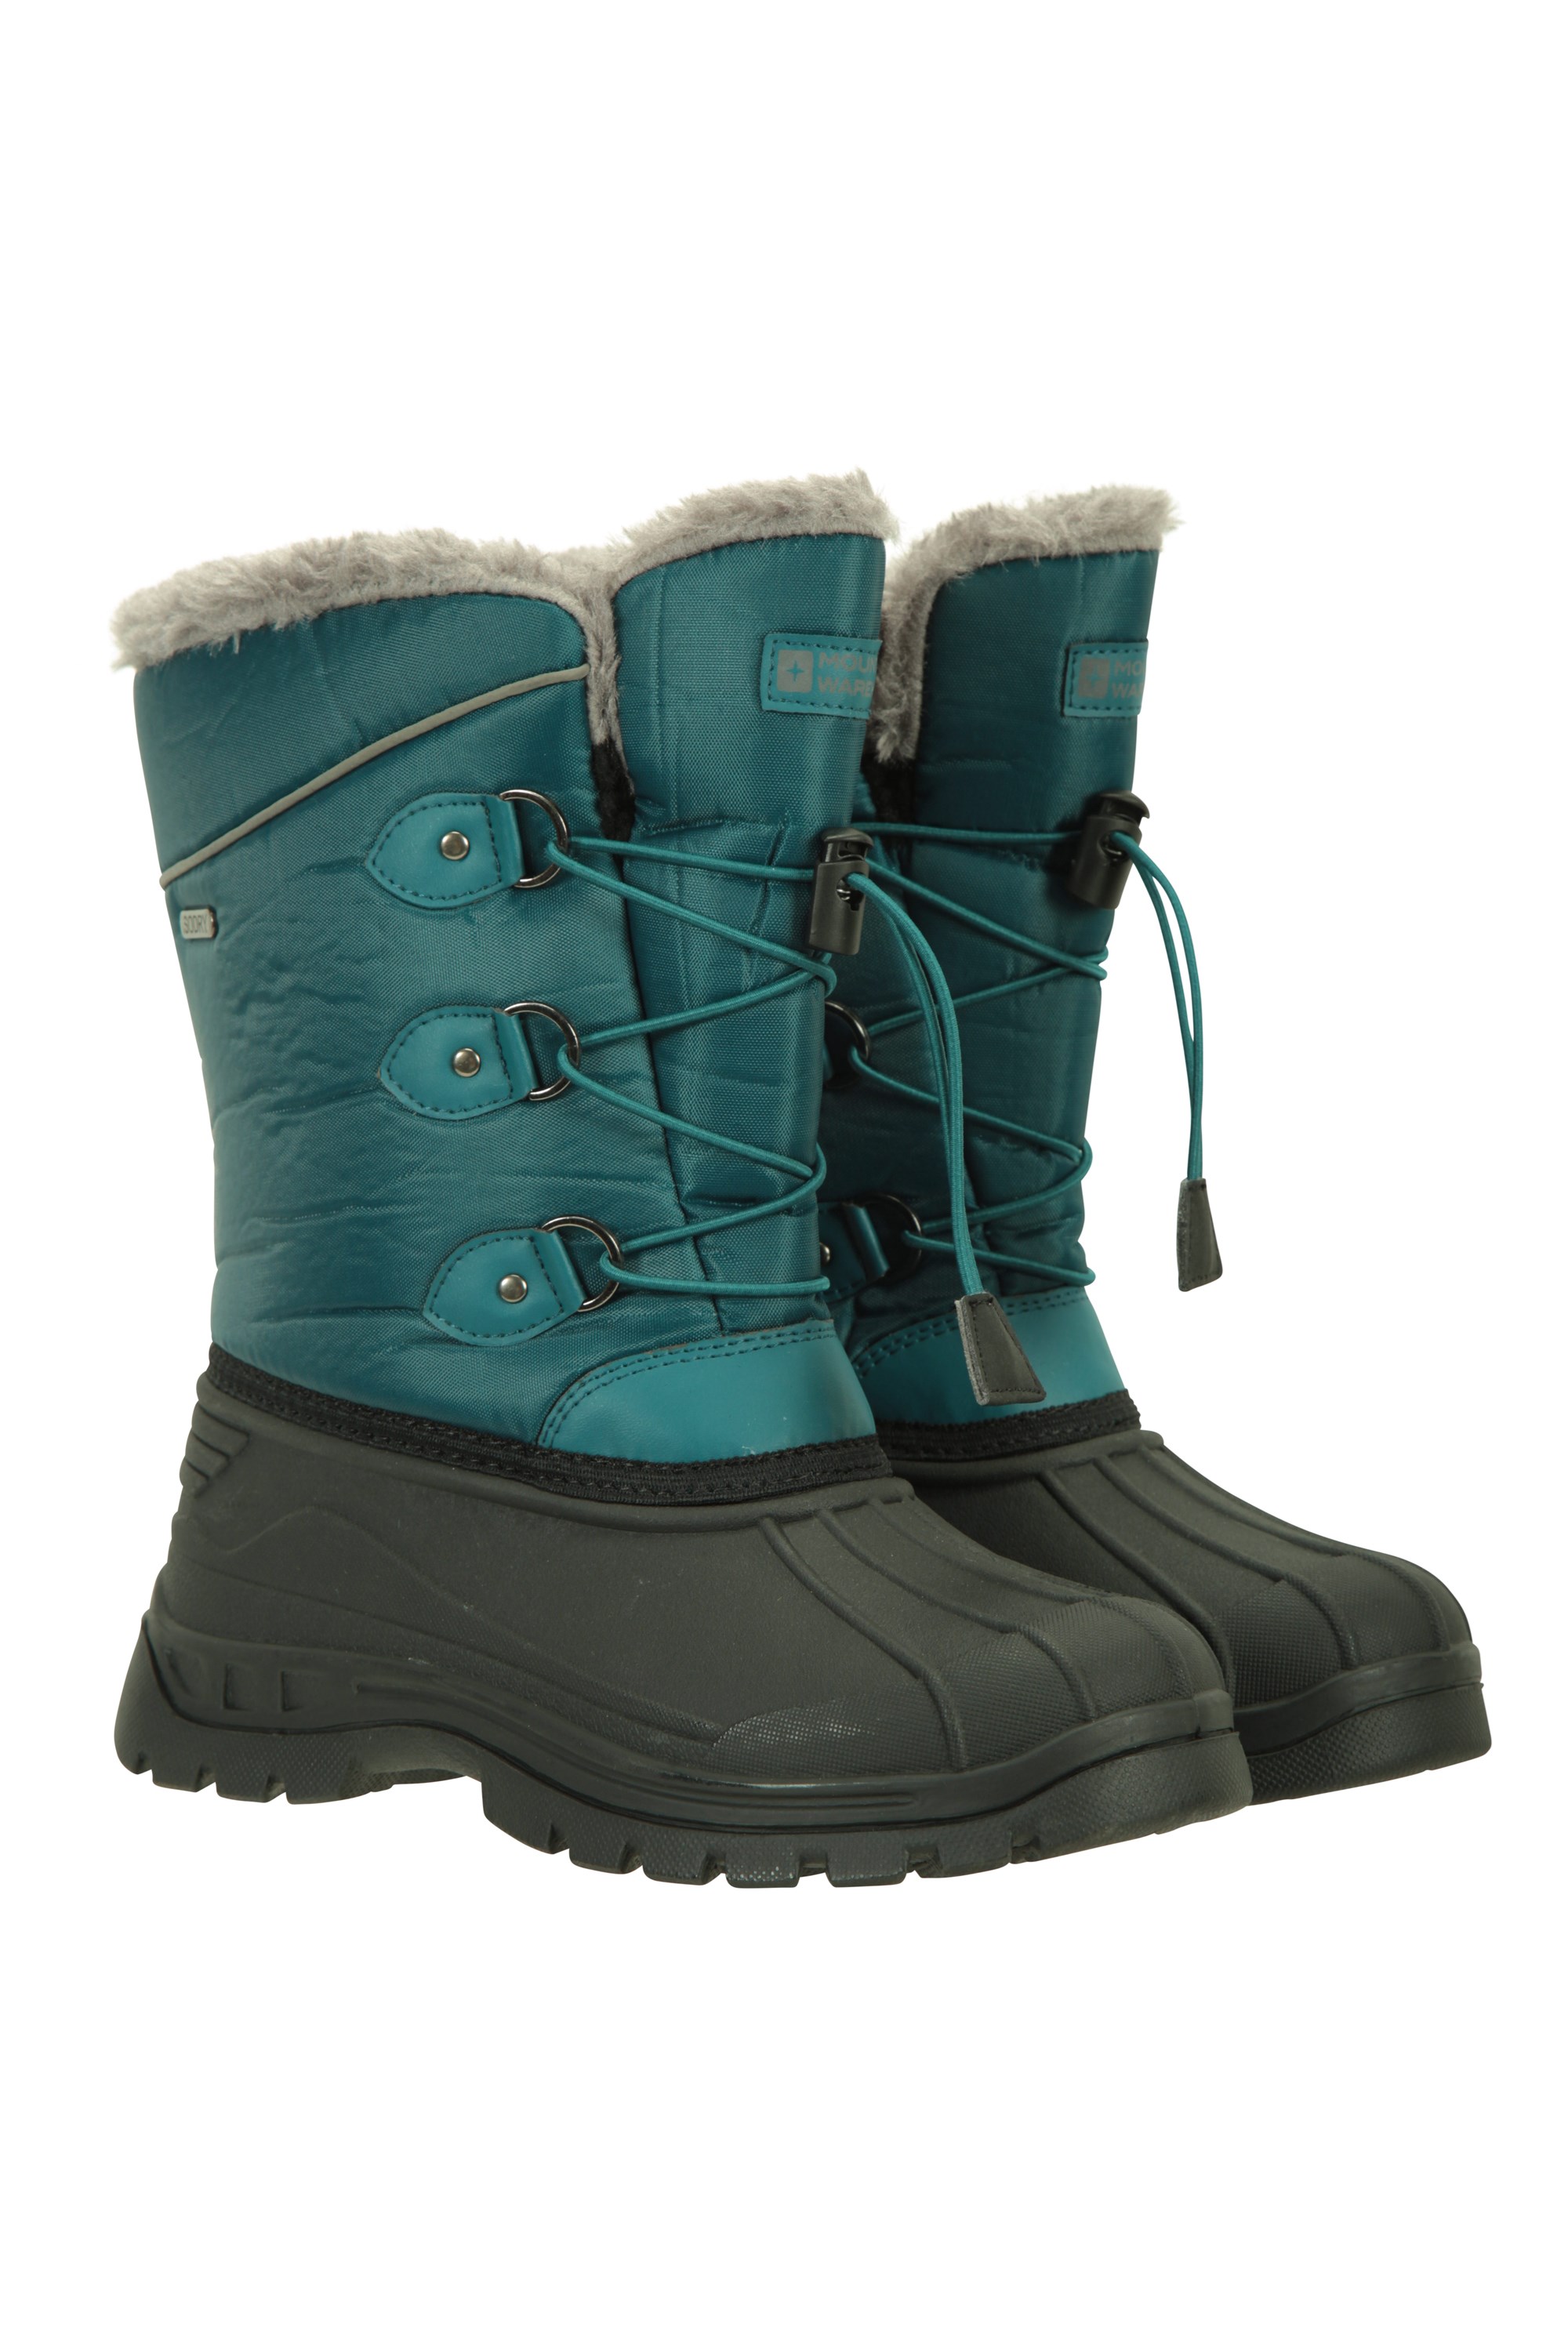 kids snow boots in store